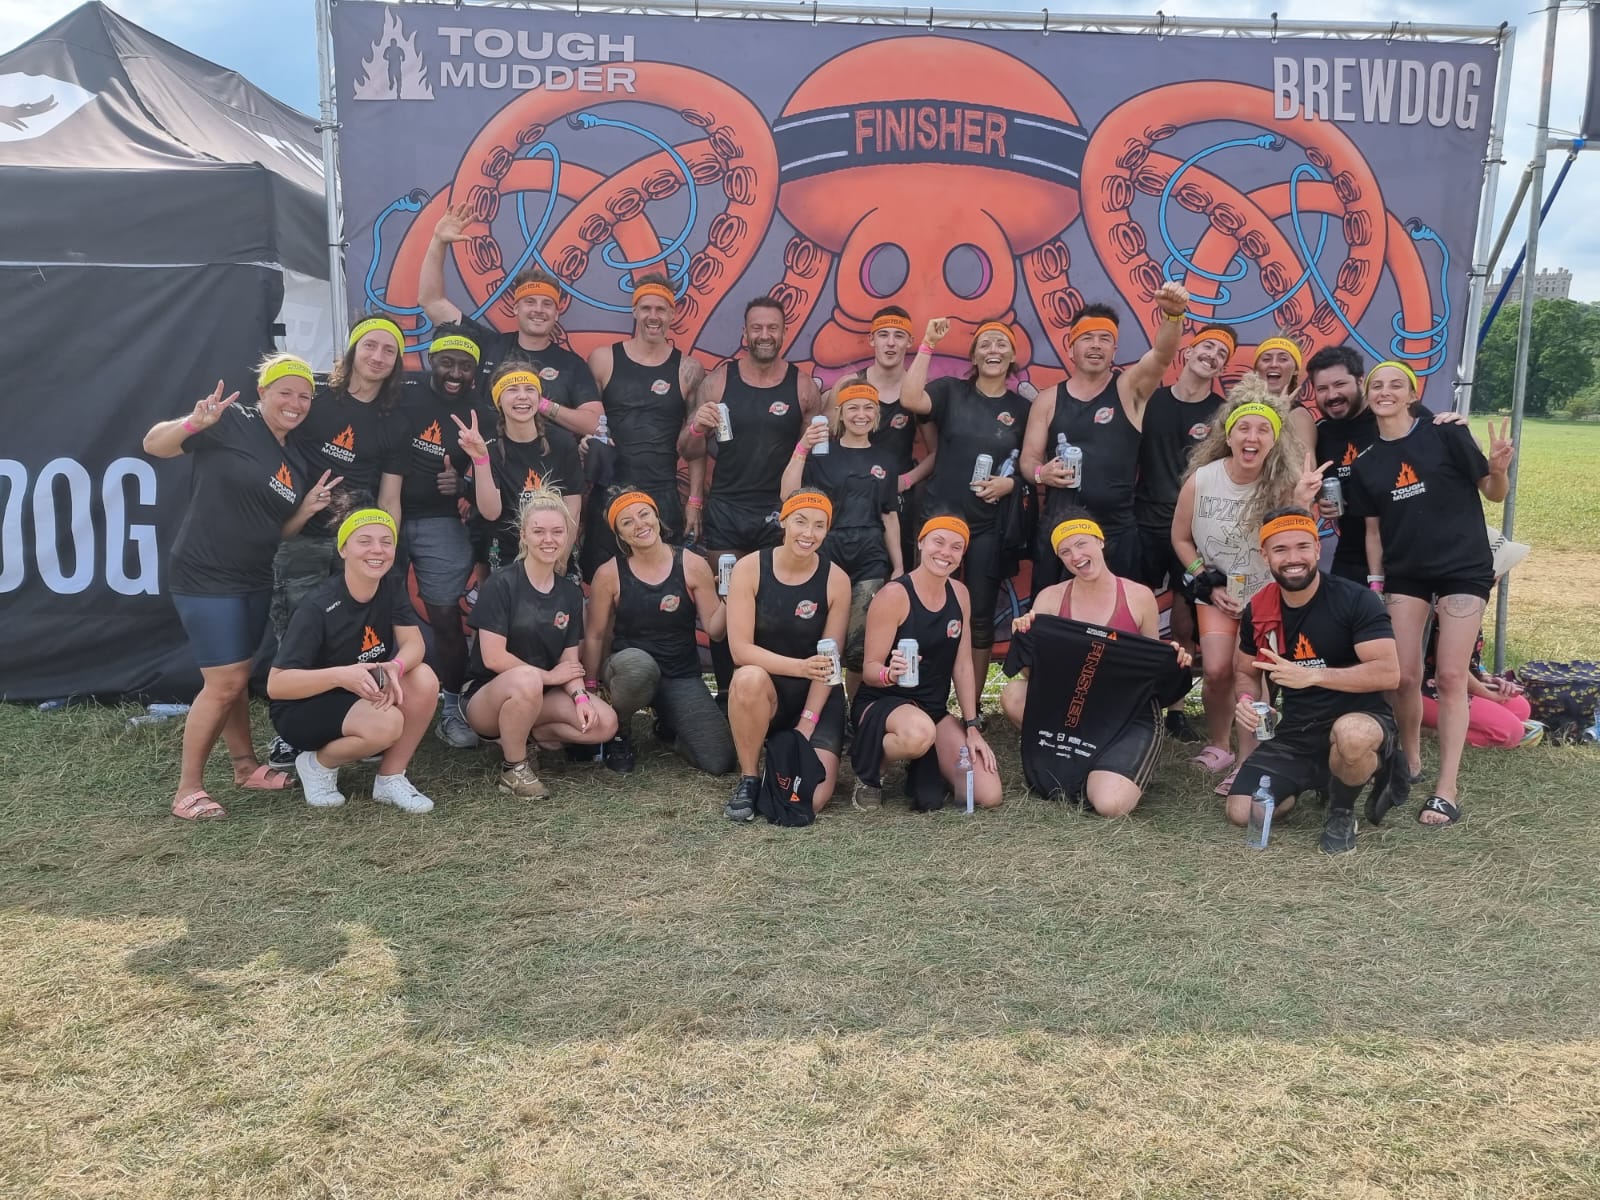 Team ted complete the Tough Mudder Challenge!